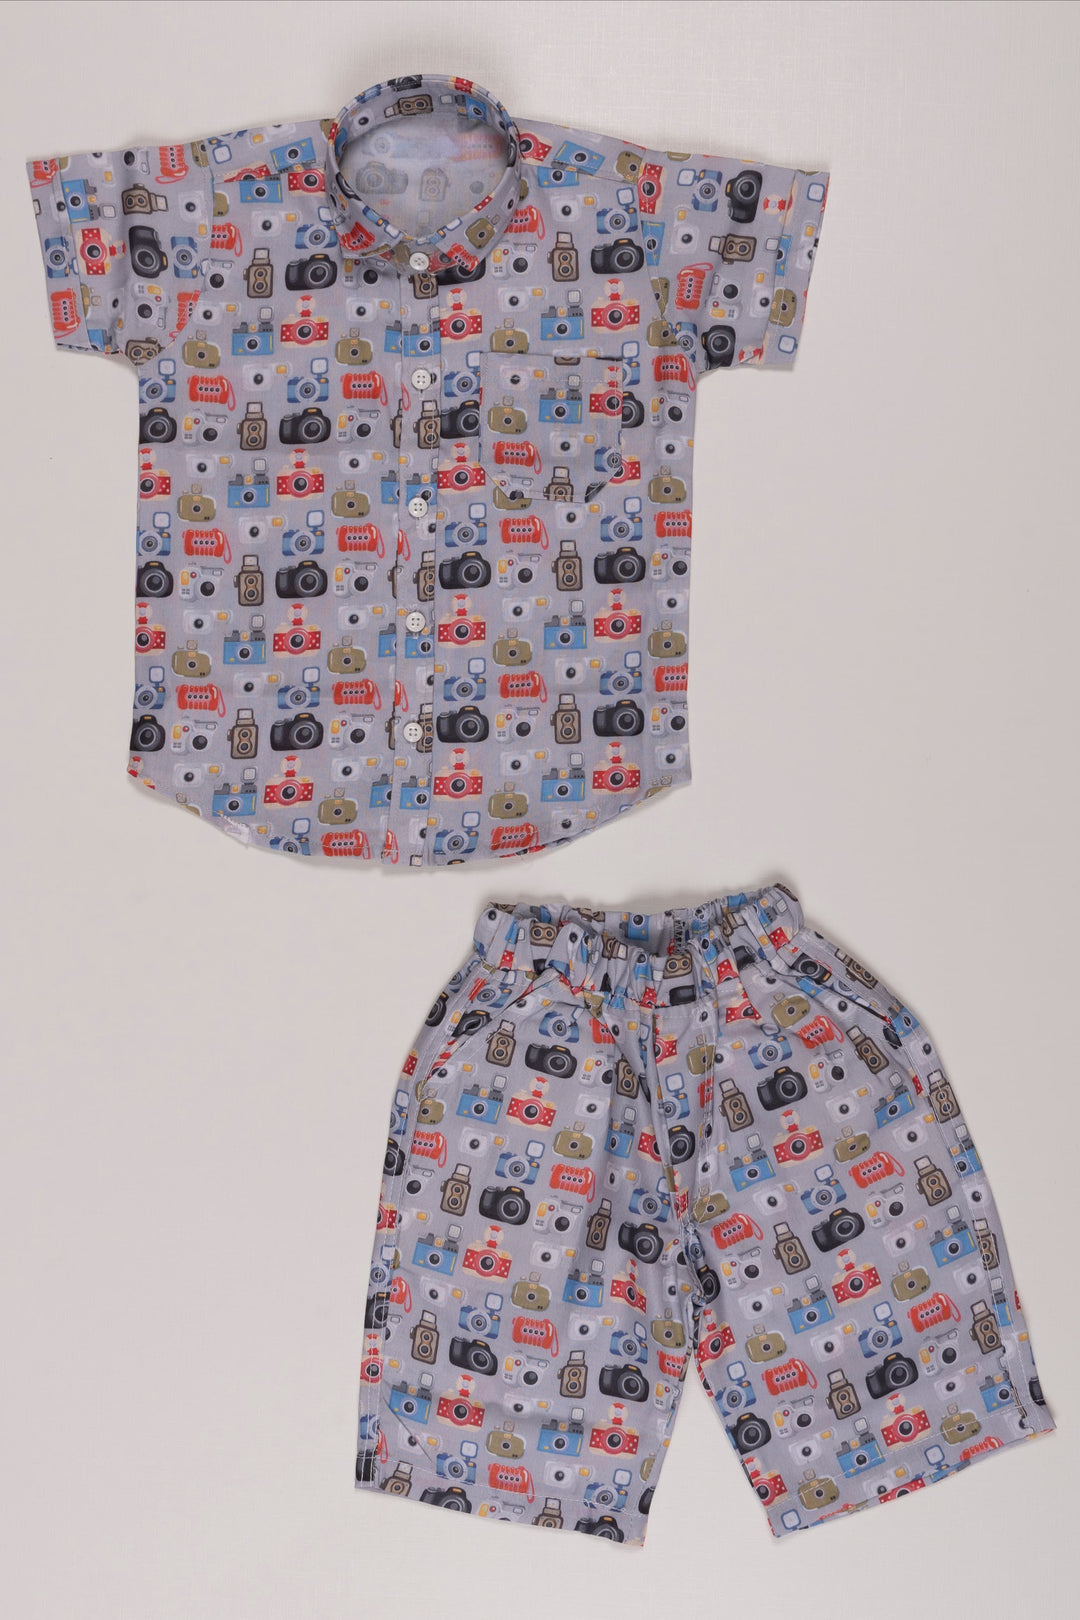 The Nesavu Boys Casual Set Boys Trendy Robots Print Co-ord Set: Casual and Fun Outfit for Everyday Wear Nesavu 16 (1Y) / Gray BCS004C-16 Printed Casual Co-ord Set for Boys | Comfortable Boys Everyday Clothing | The Nesavu